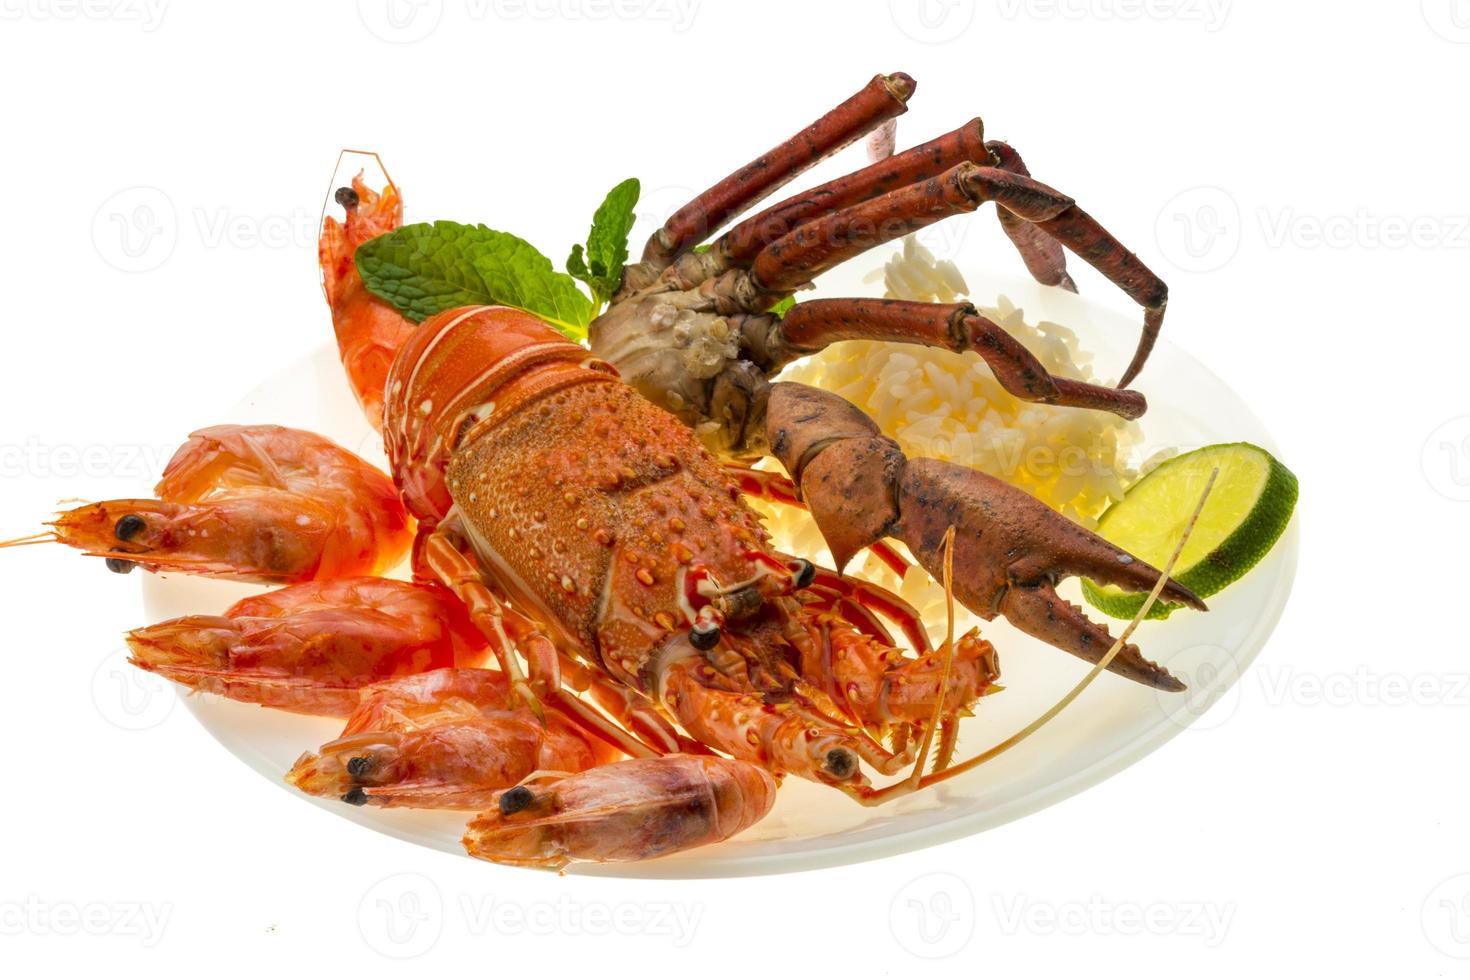 Spiny lobster, shrimps, crab legs  and rice photo